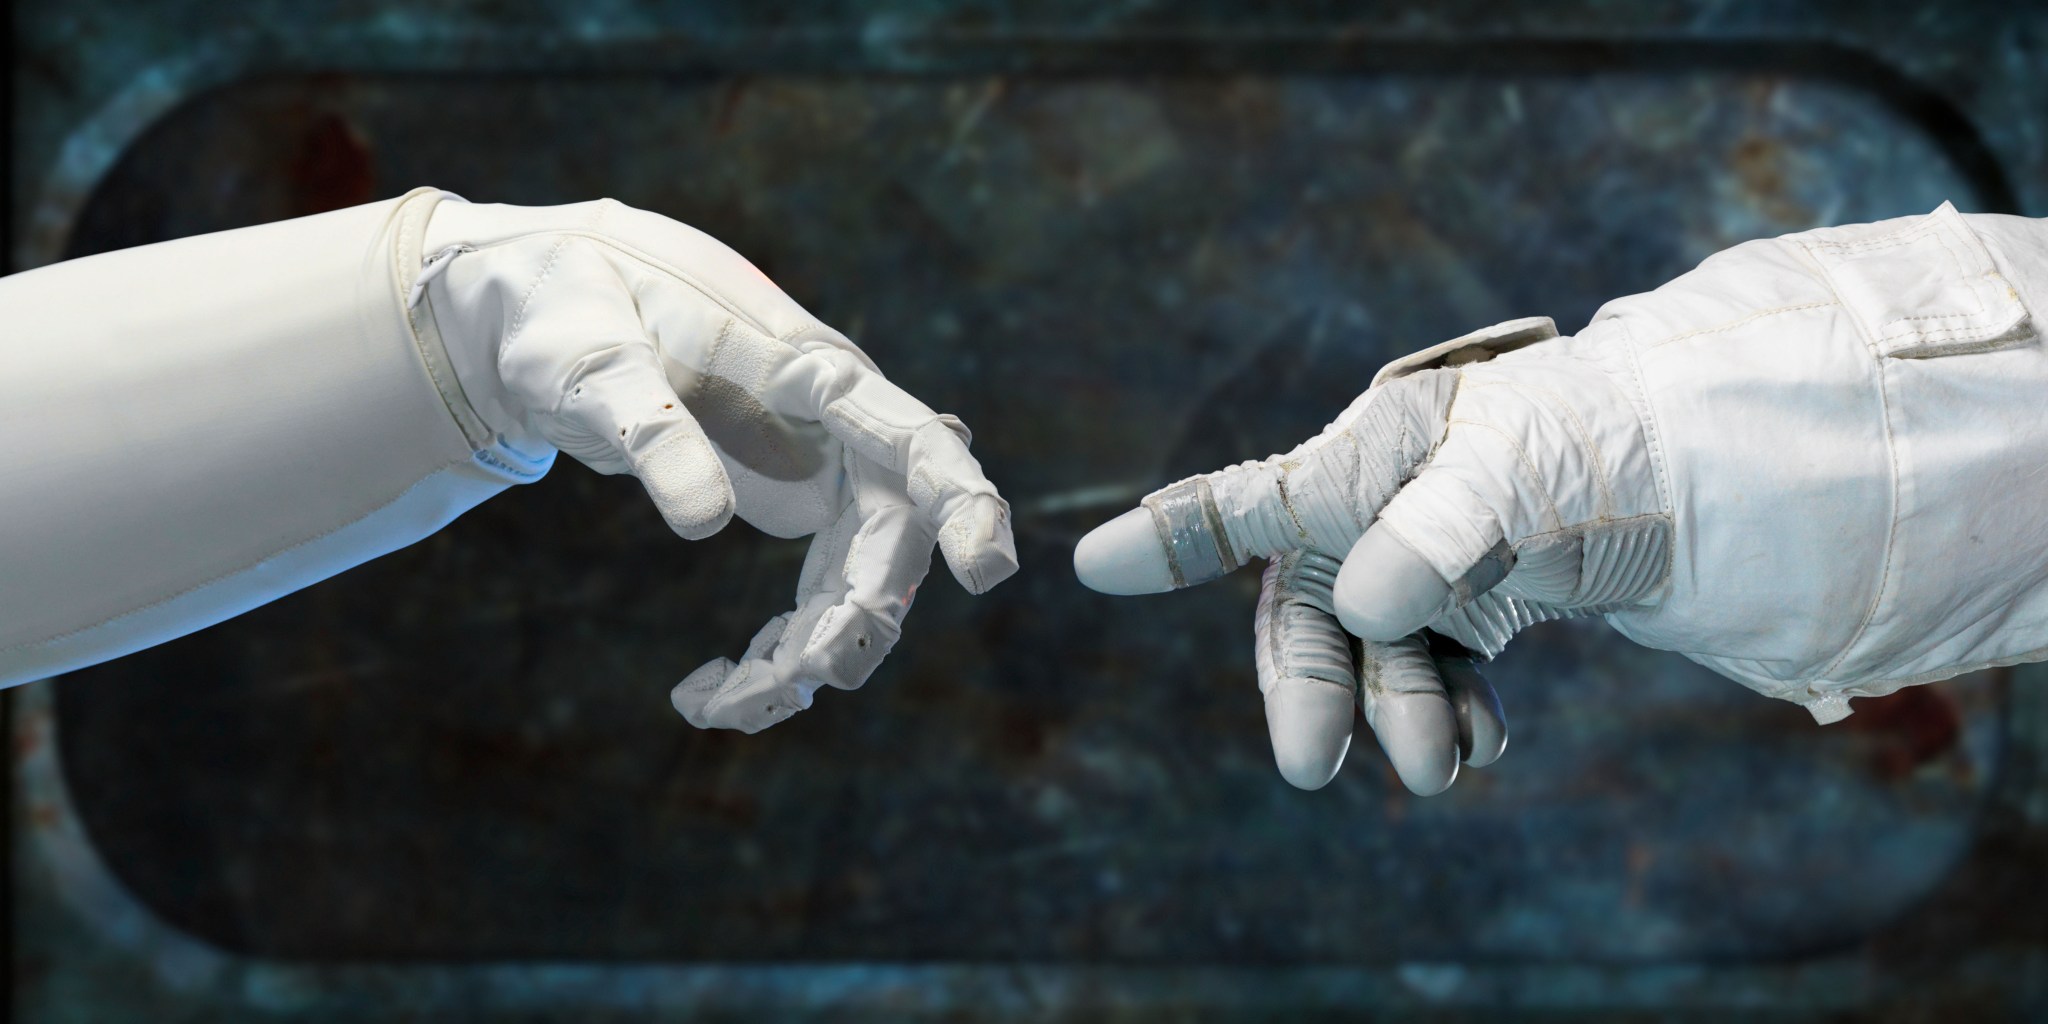 Robotic hand reaching out to touch a human's hand wearing a spacesuit glove